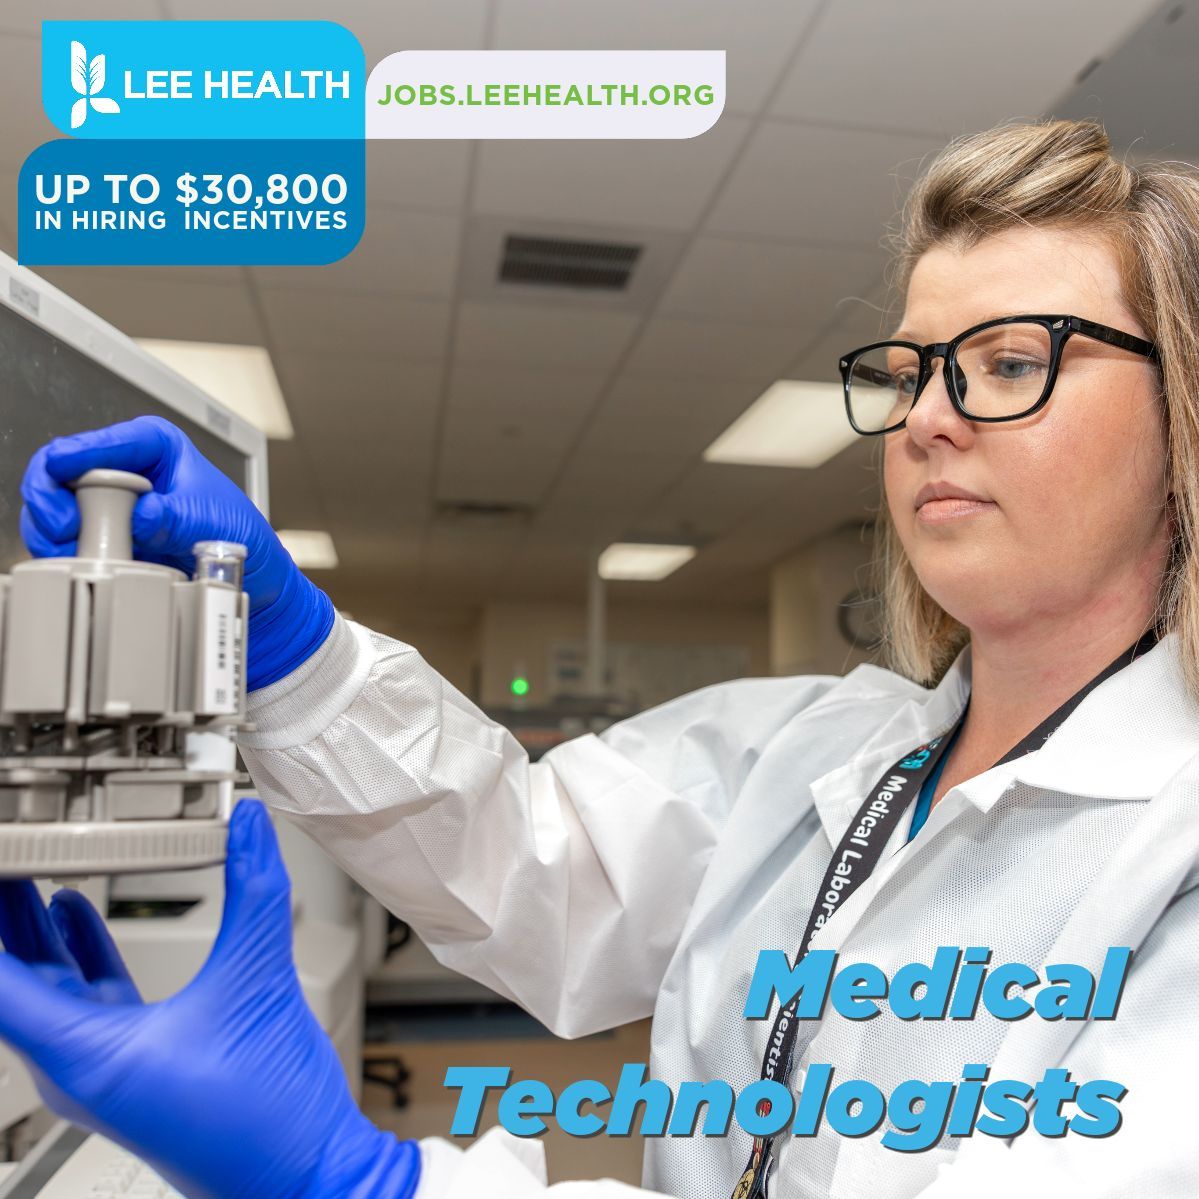 🔬 Exciting Opportunities for Medical Technologists! 🔬

Join Lee Health and be valued for your contributions! Apply Today: buff.ly/2sK8Tpn 

#LeeHealth #MedicalTechnologist #FortMyers #CapeCoral #Florida #CLS #MLS #MedTech #Lab #ASCP